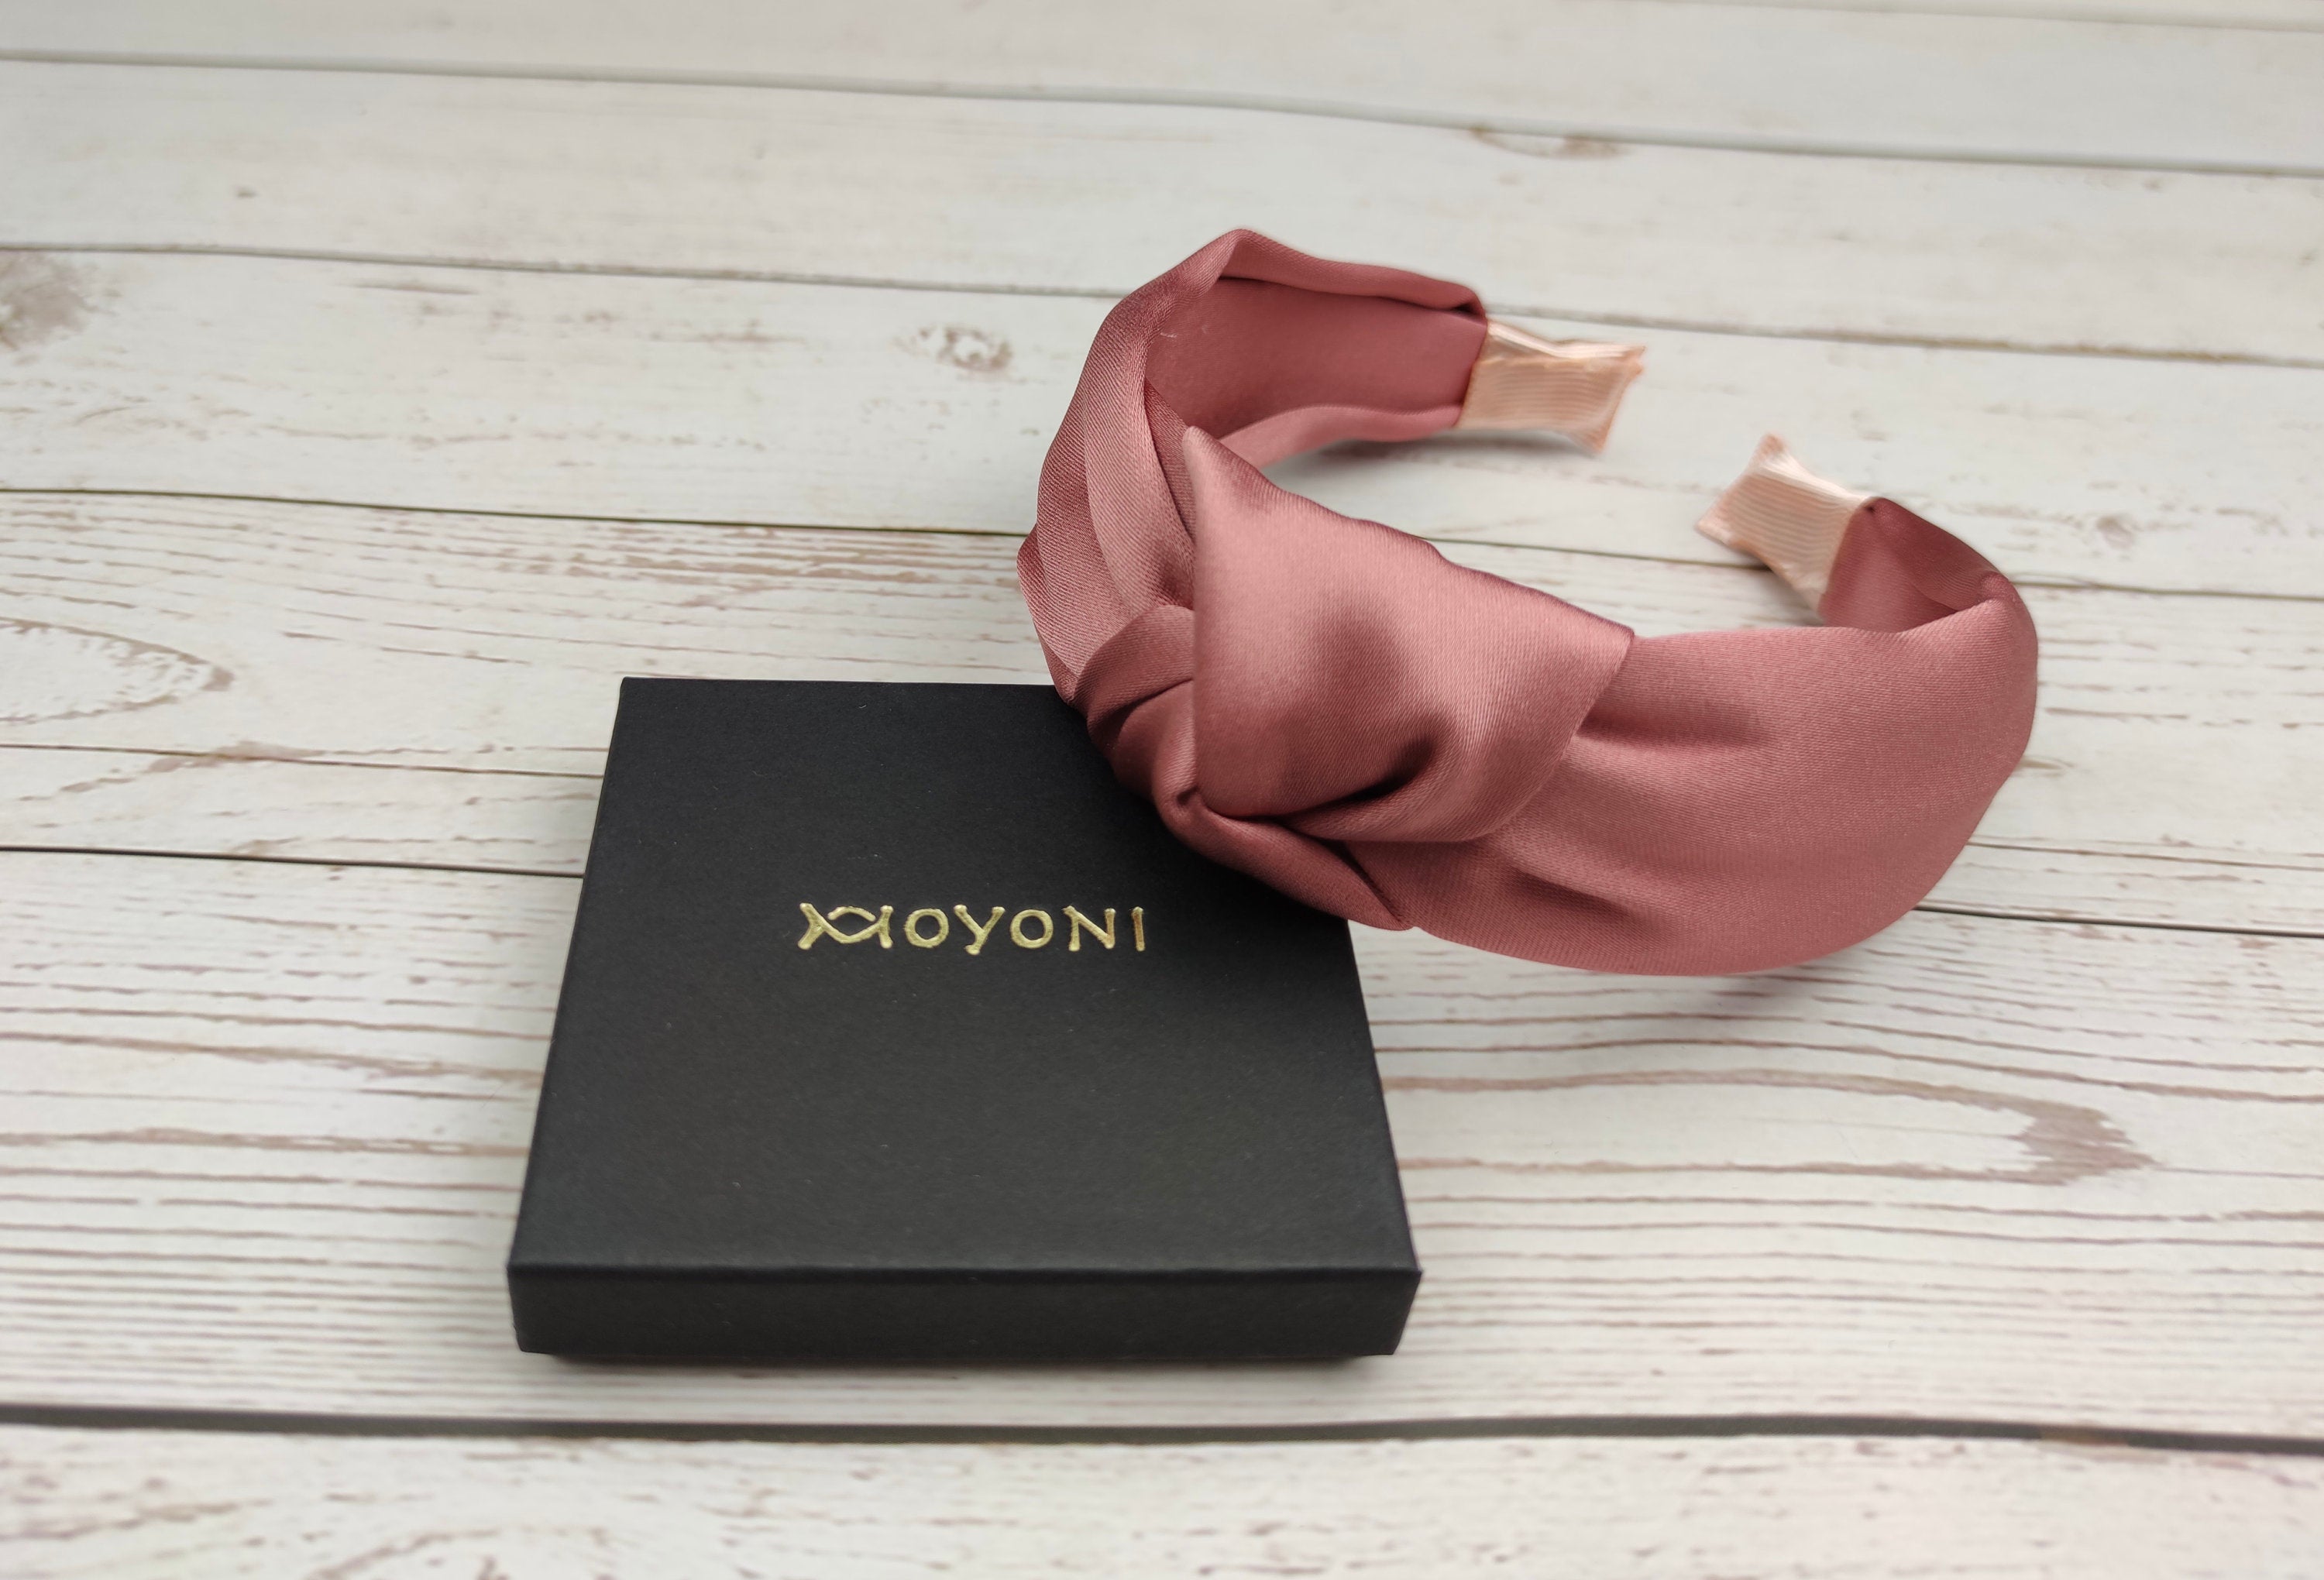 Find the best pink satin headband that will suit all your fashion needs in this roundup of the best salmon pink color satin headbands. From Alice band to wide headbands, find the perfect one for you!